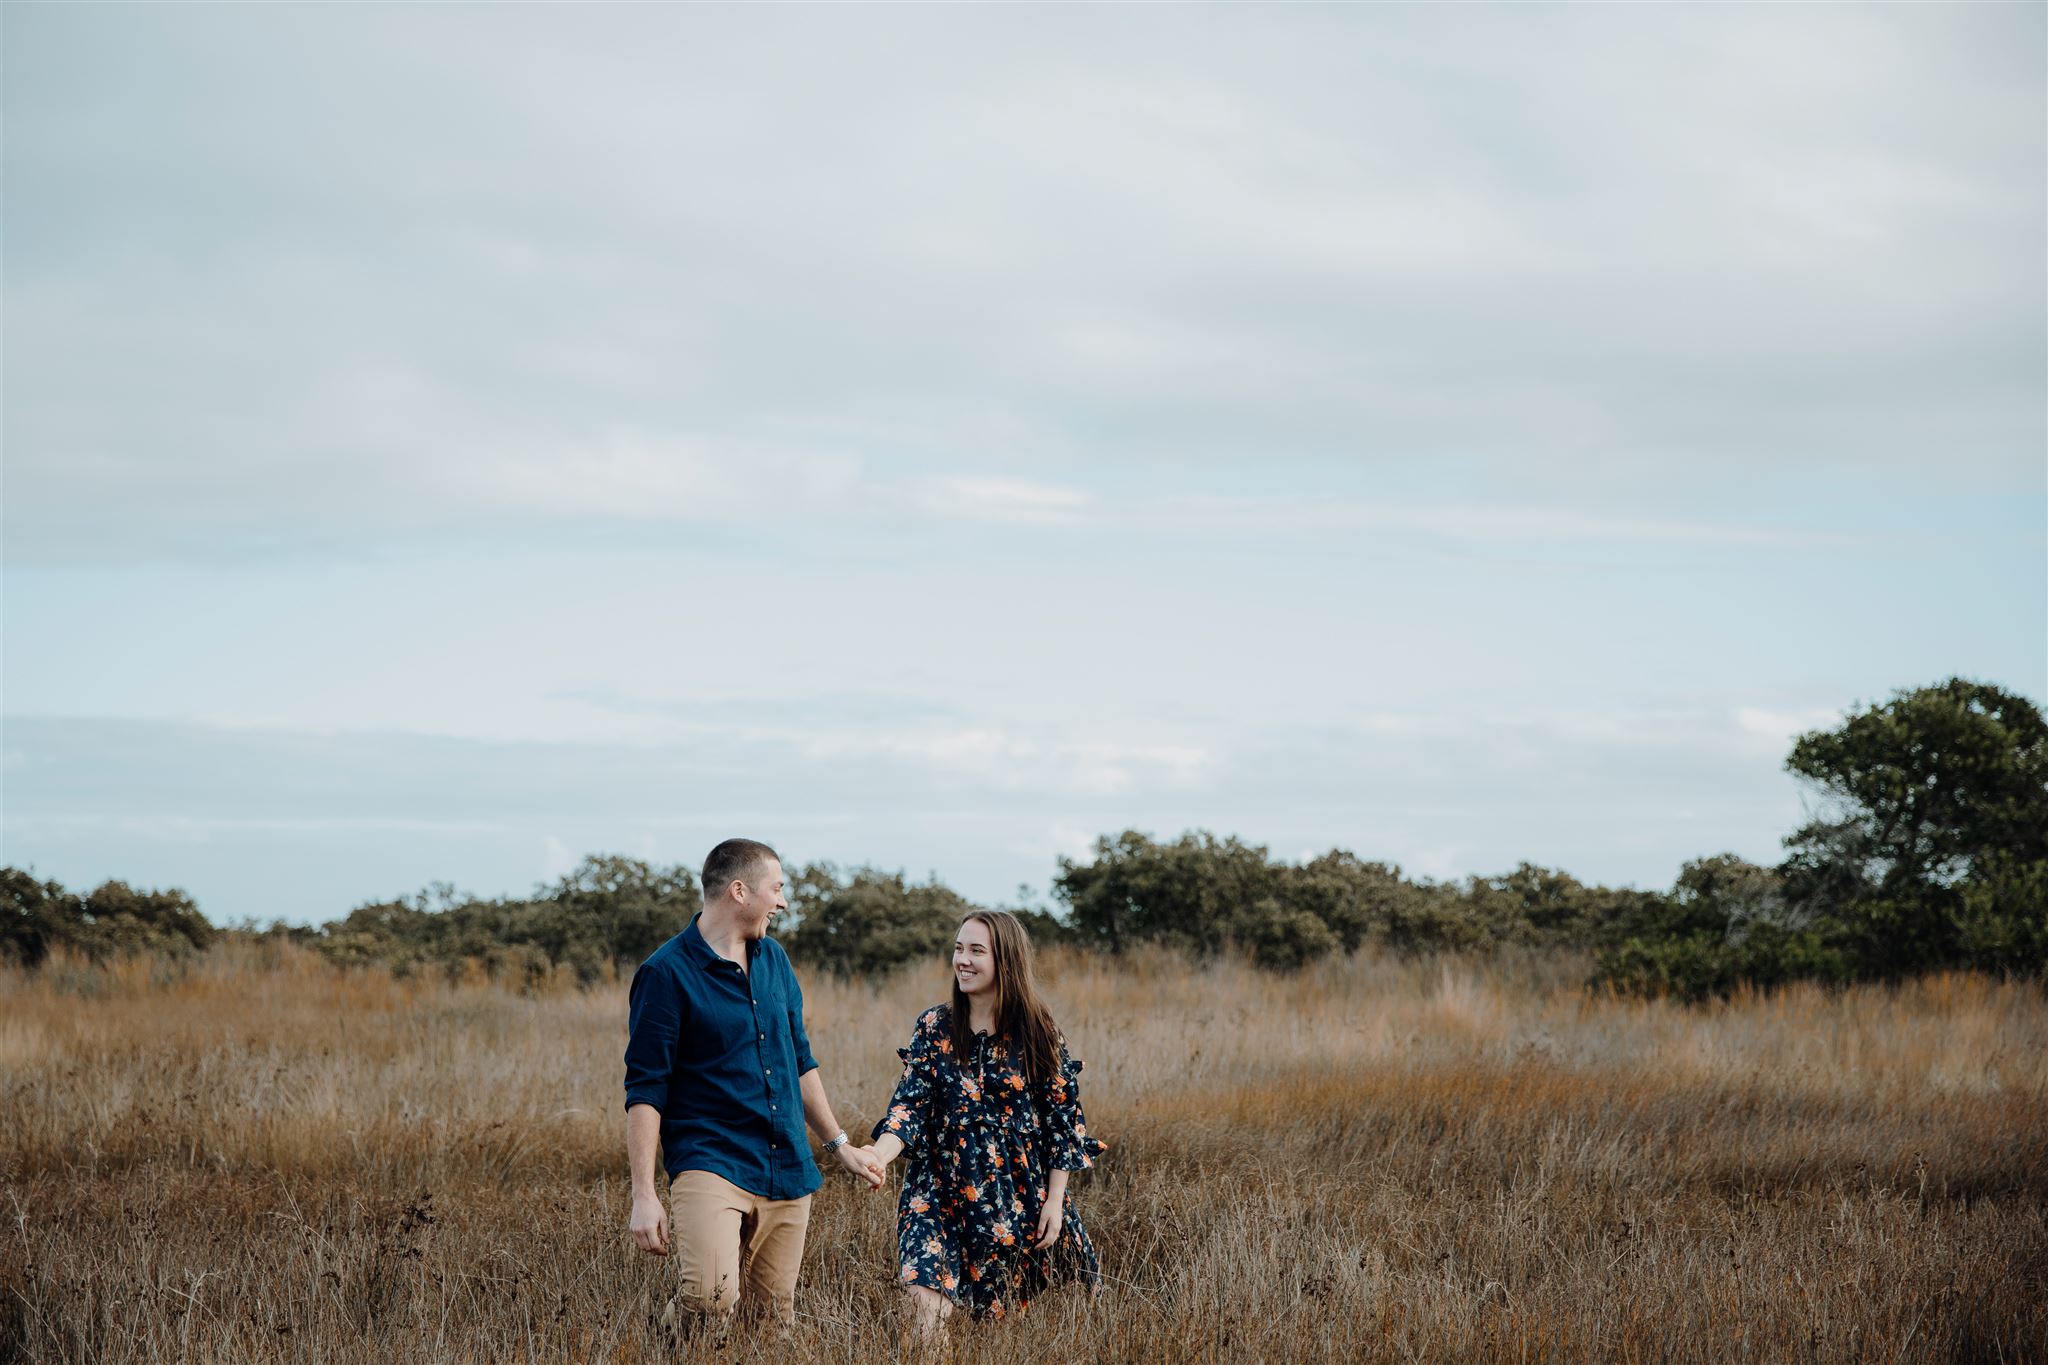 A couple walk through a long field of grass holding hands during an engagement photoshoot by Waikato Photographer Haley Adele Photography